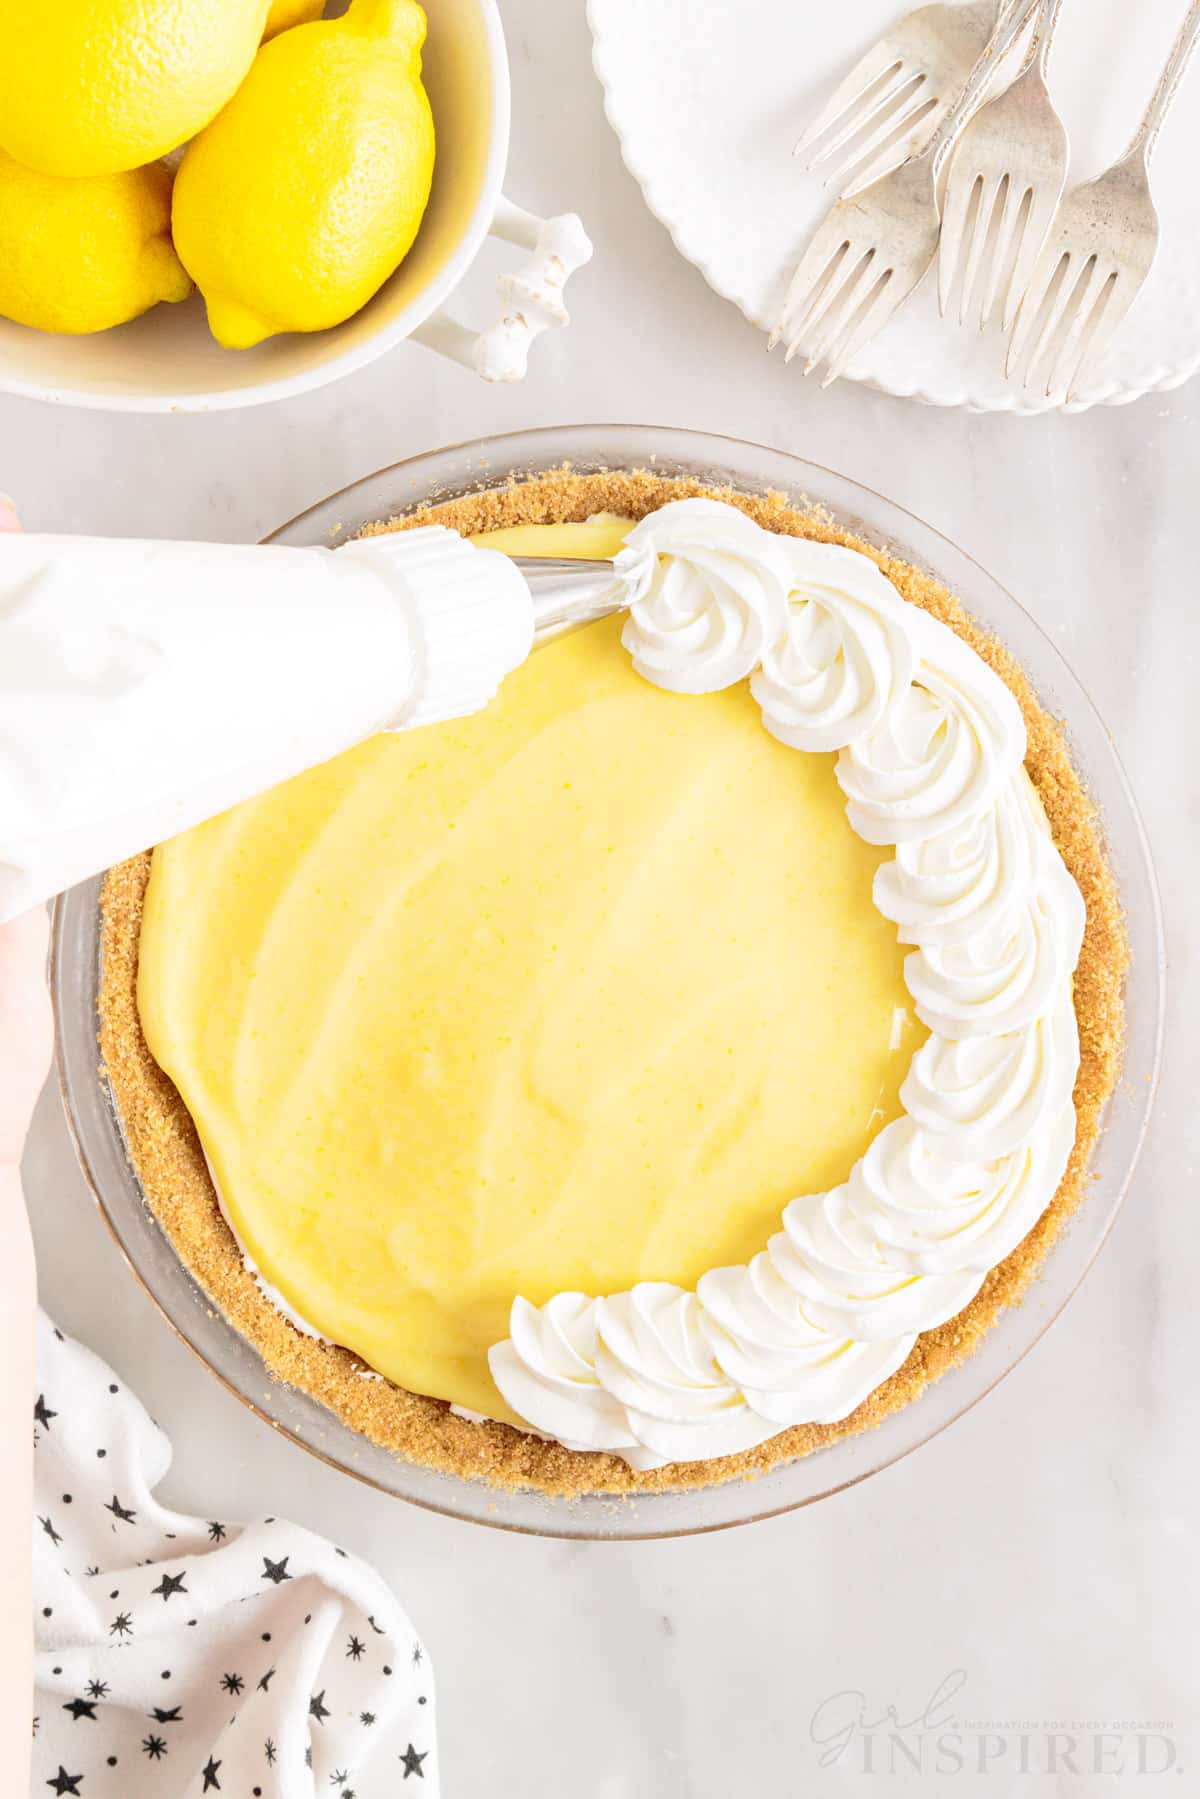 dollops of whipped cream piped onto lemon cream cheese pie with a piping bag